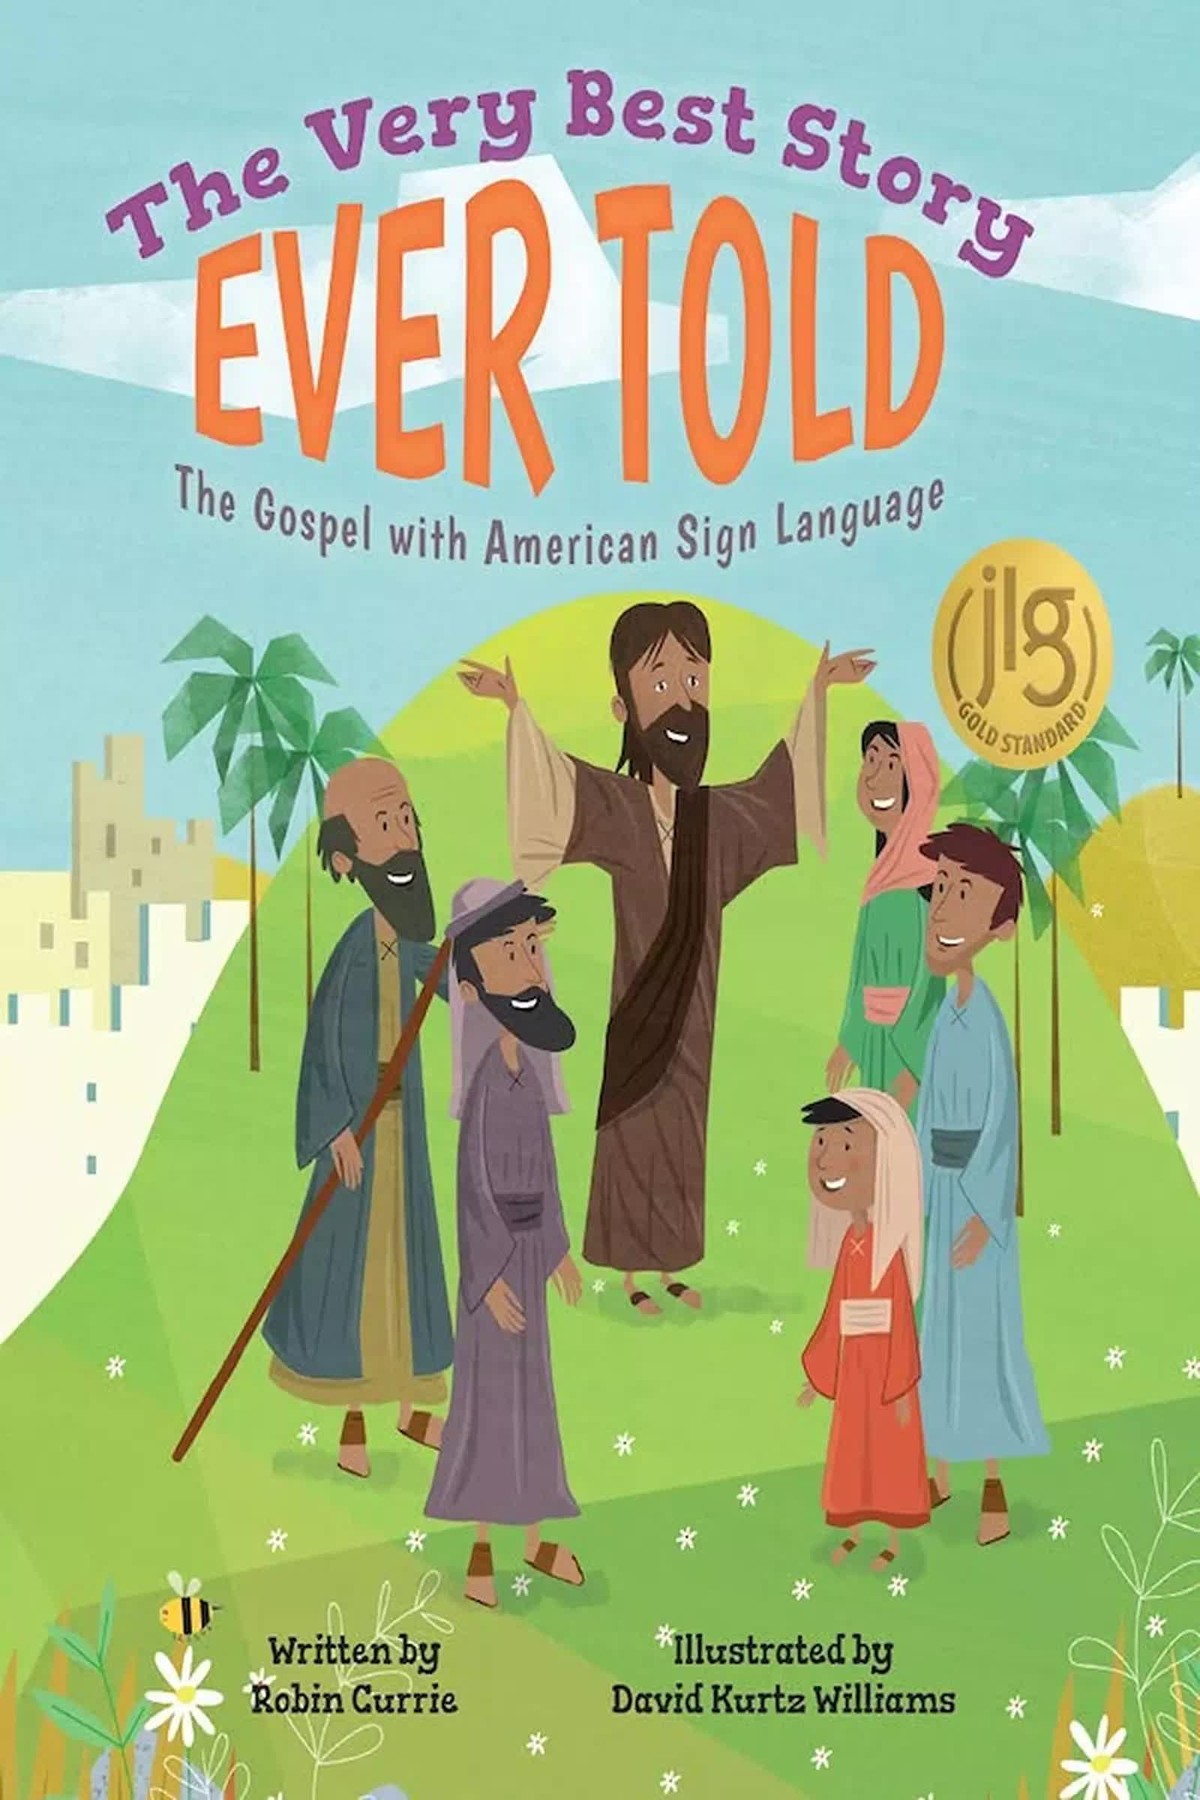 The Very Best Story Ever Told: The Gospel with American Sign Language